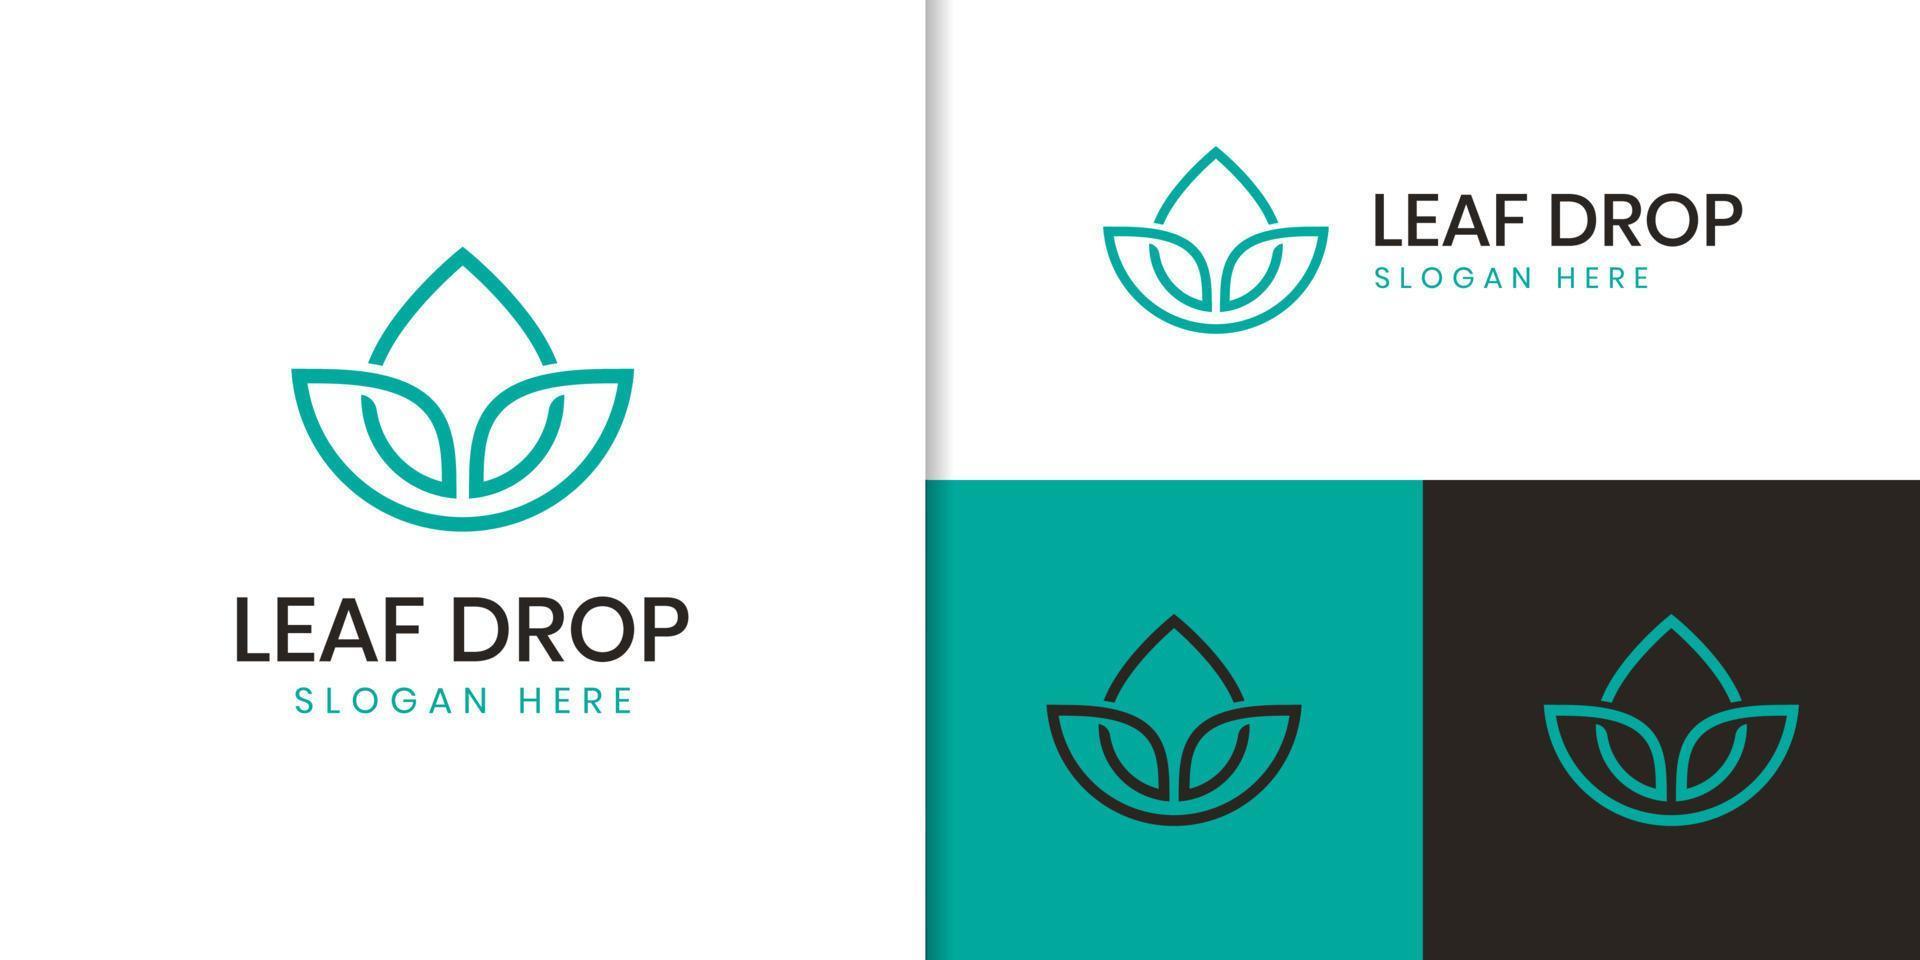 https://static.vecteezy.com/system/resources/previews/011/378/030/non_2x/modern-simple-logo-of-leaf-drop-symbol-icon-for-beauty-cosmetics-health-care-nature-product-label-design-template-free-vector.jpg